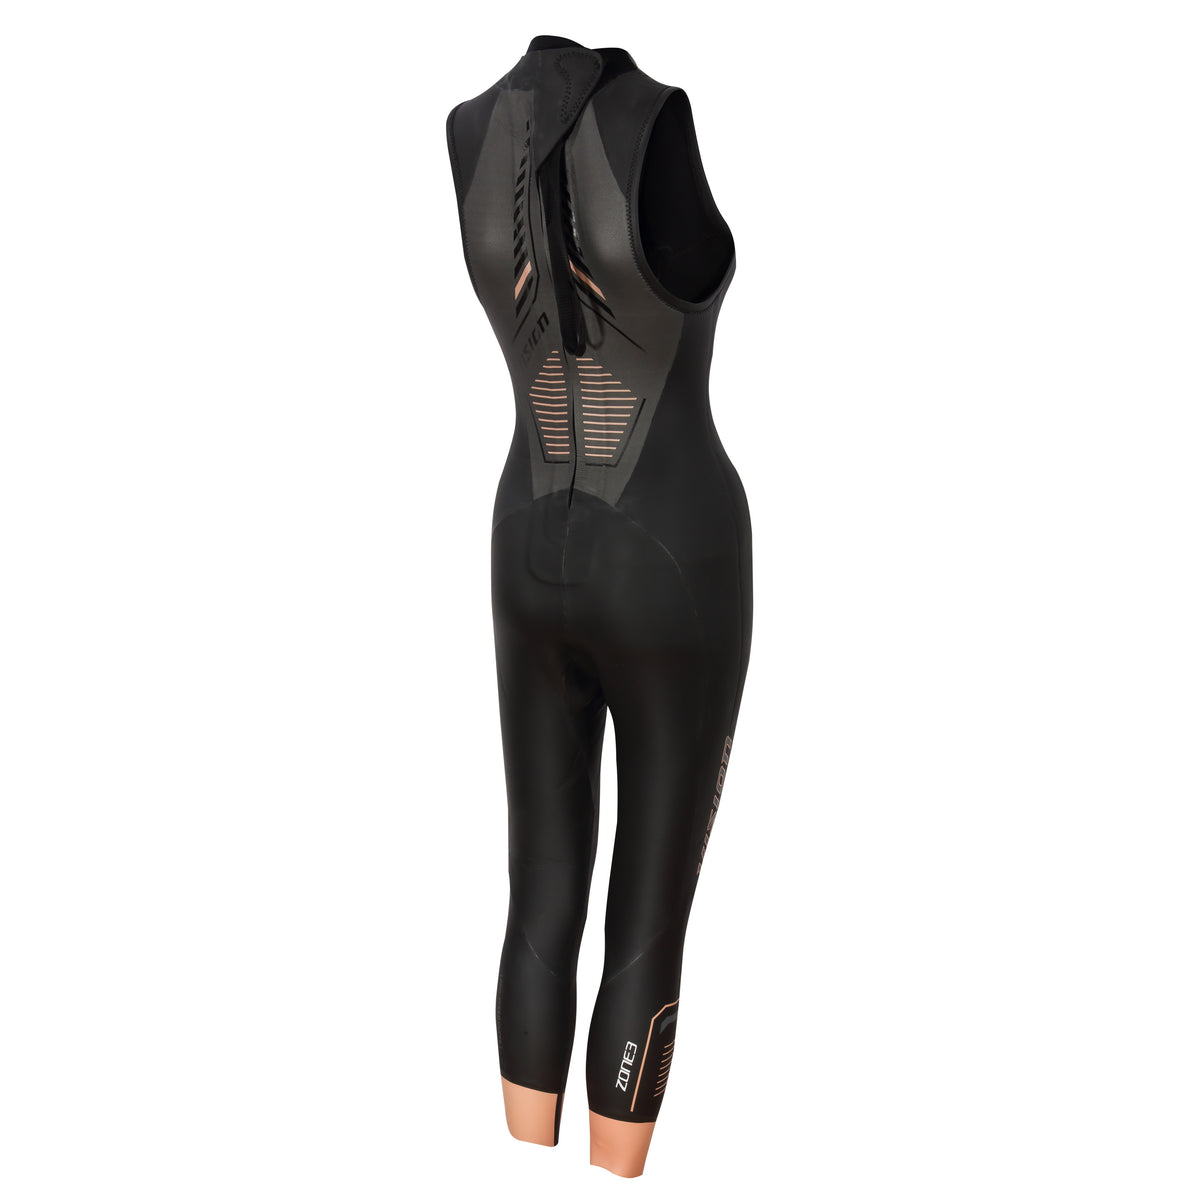 Vision Sleeveless Wetsuit - Mulher